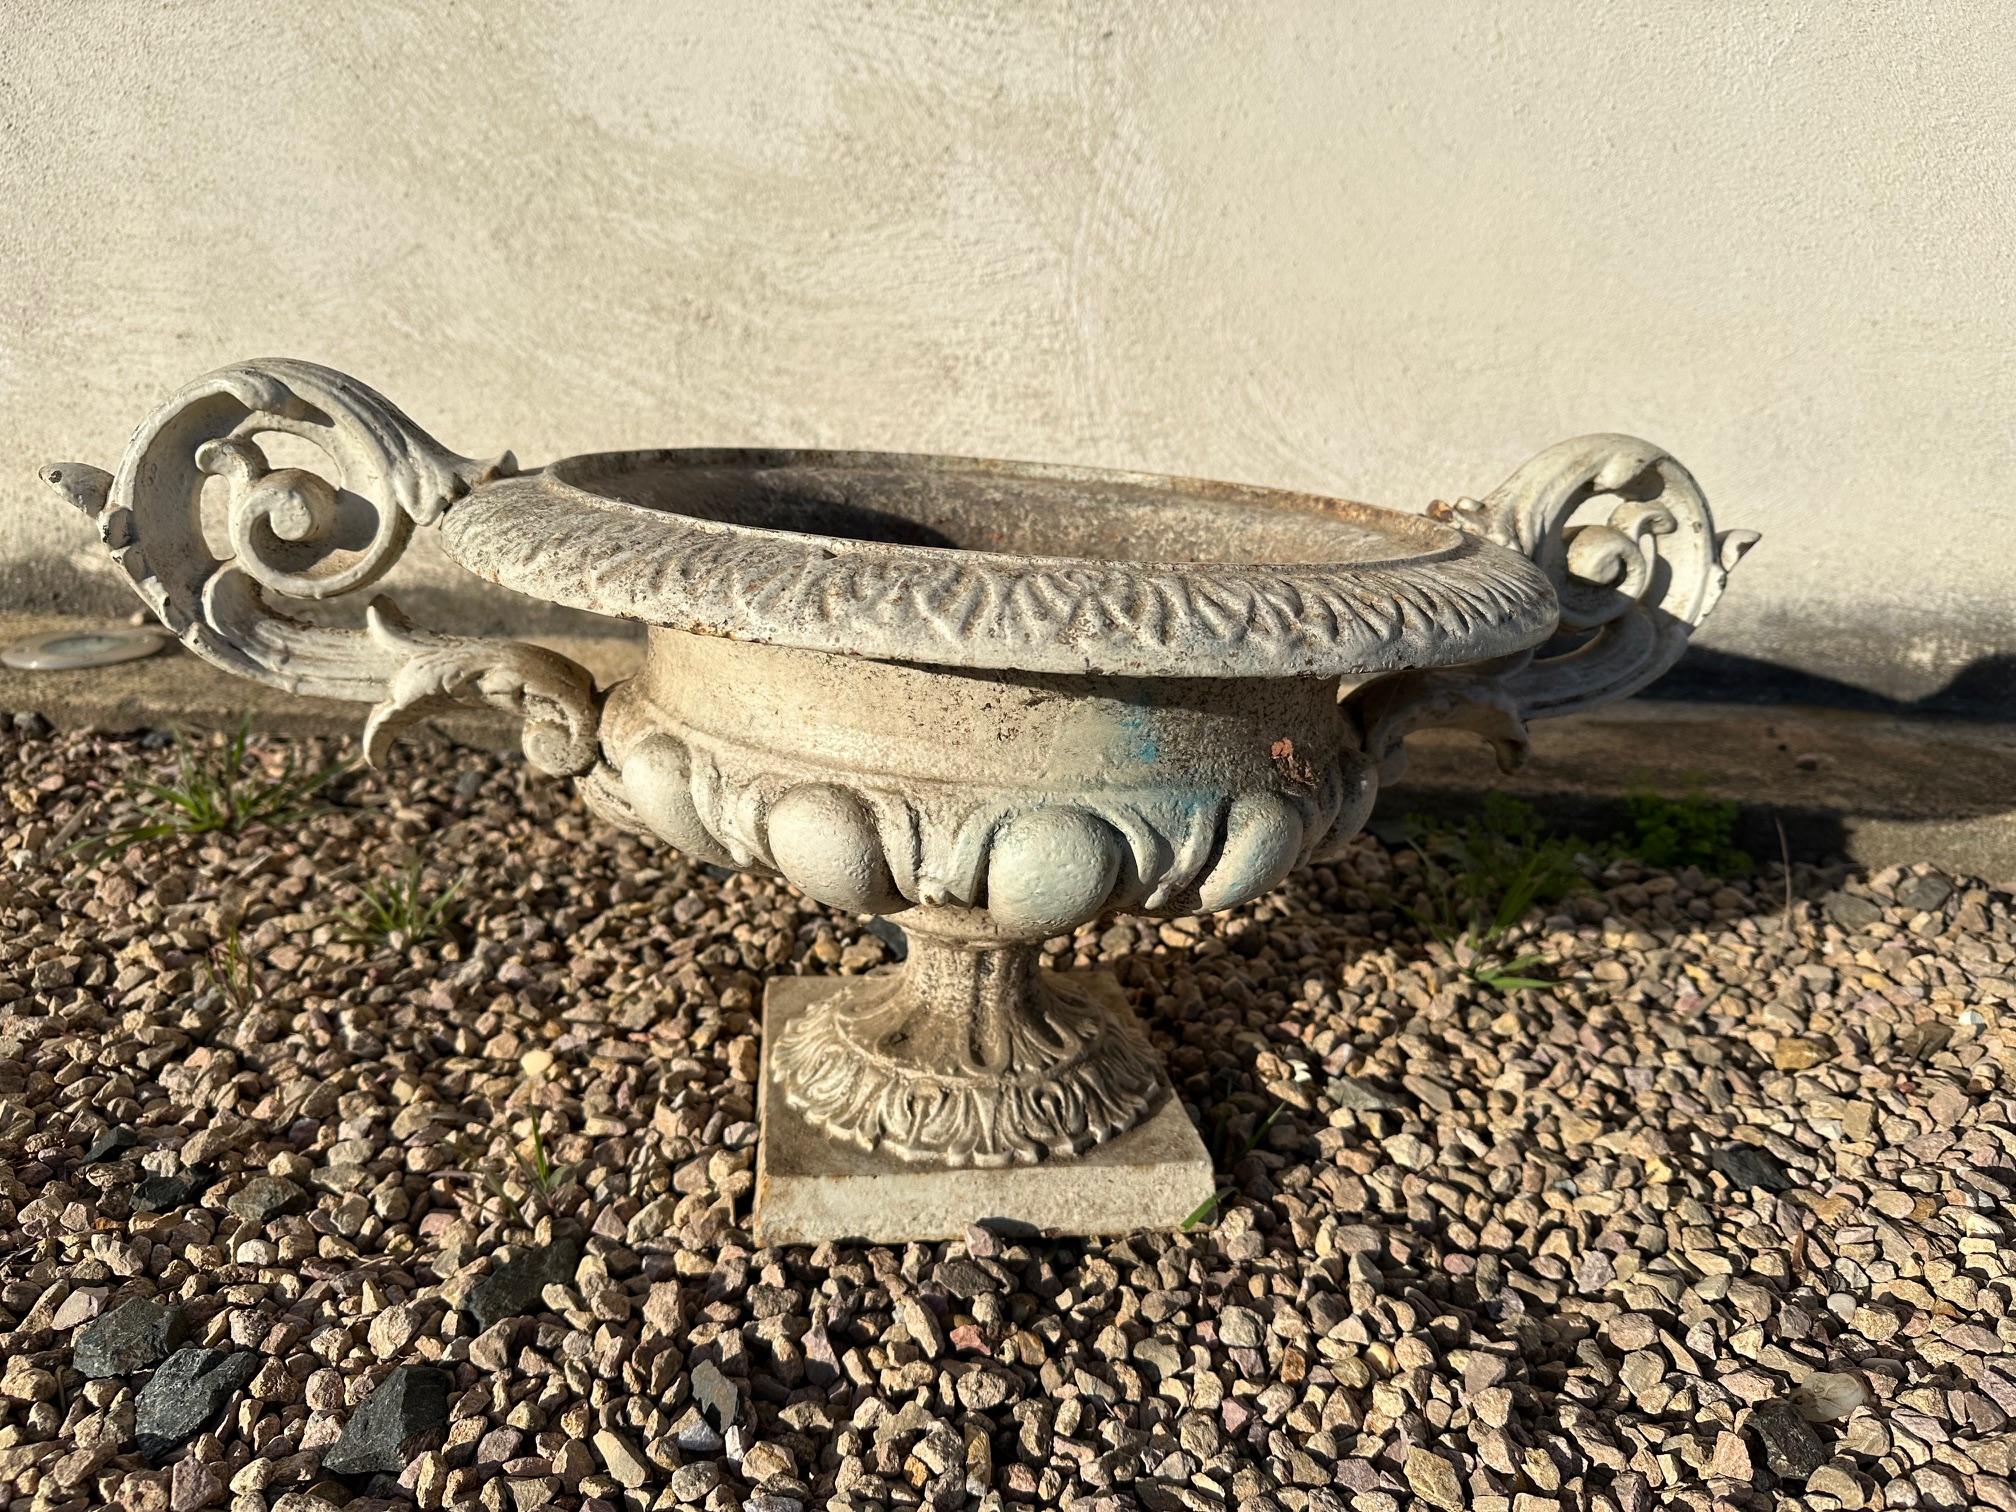 Early 20th century French Medicis or cast iron planter dating from the 1900s in good condition.
Two large handles. Ideal in a garden.